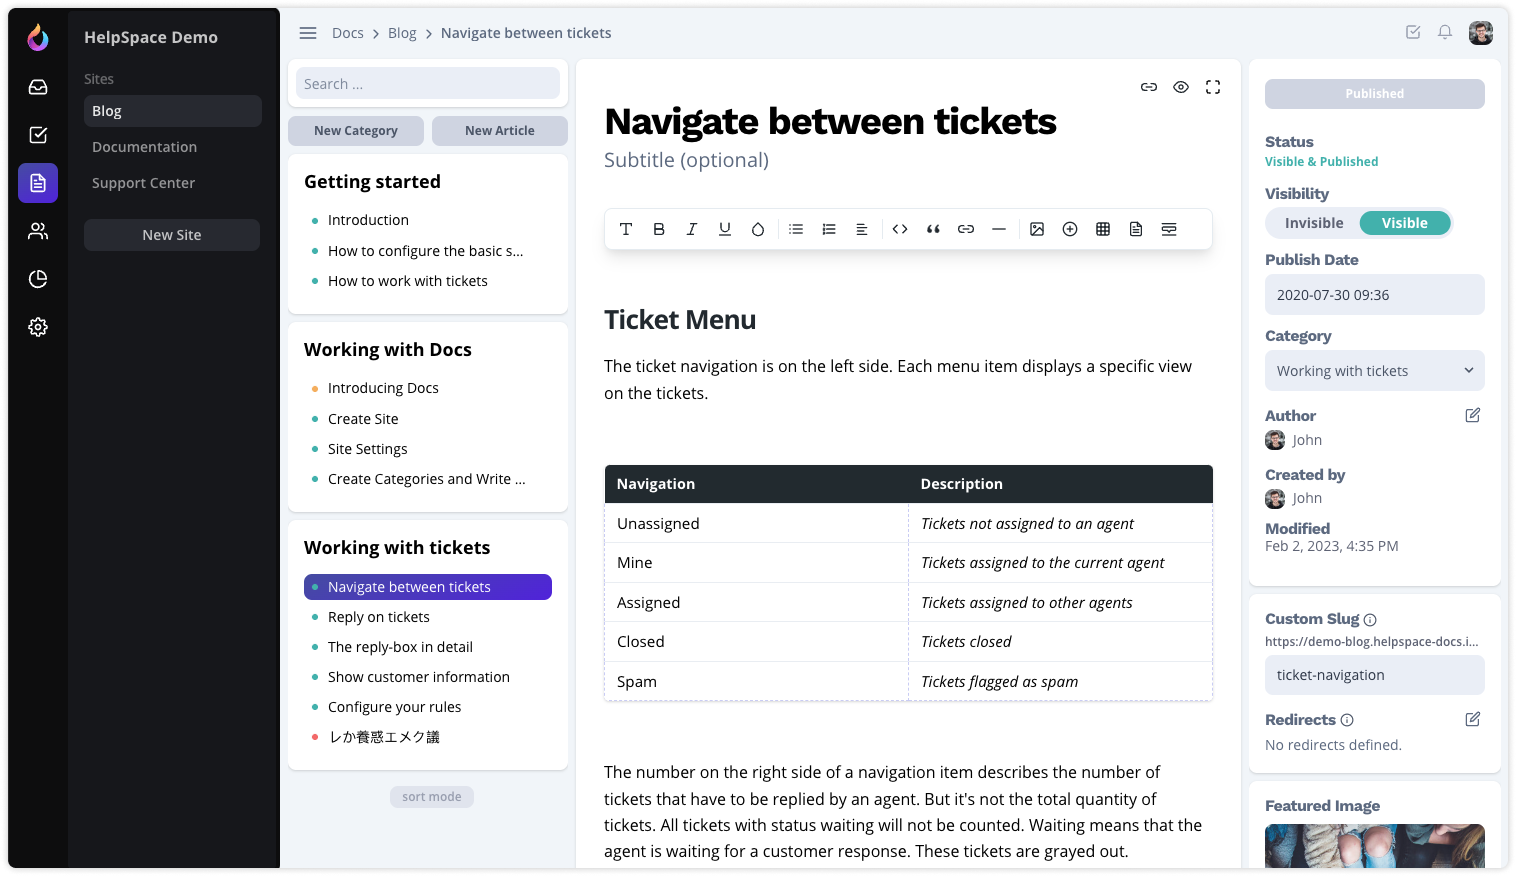 HelpSpace Software - HelpSpace Docs: an integrated knowledge base, which can be shared within the team or with customers, to find solutions in ticket processing or publish information for 24x7 customer access.